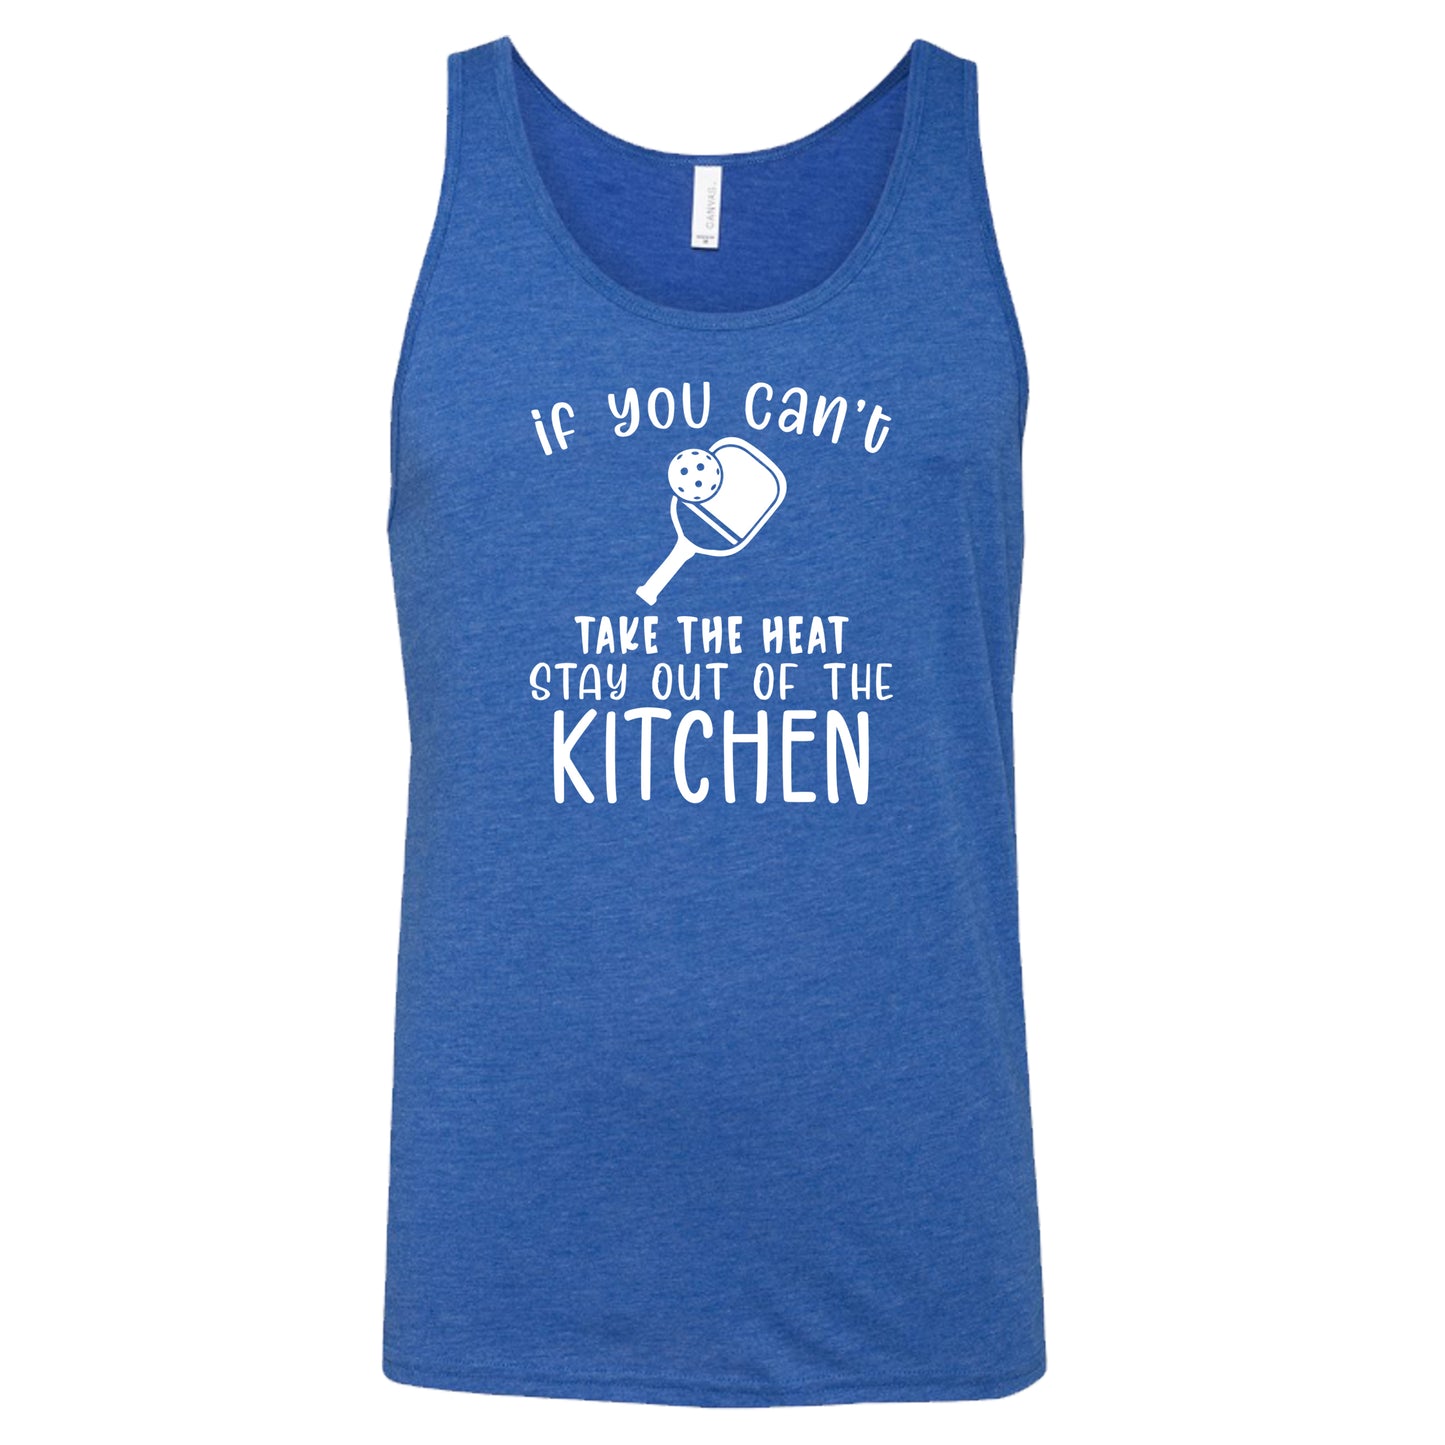 If You Can't Take The Heat Stay Out Of The Kitchen Shirt Unisex